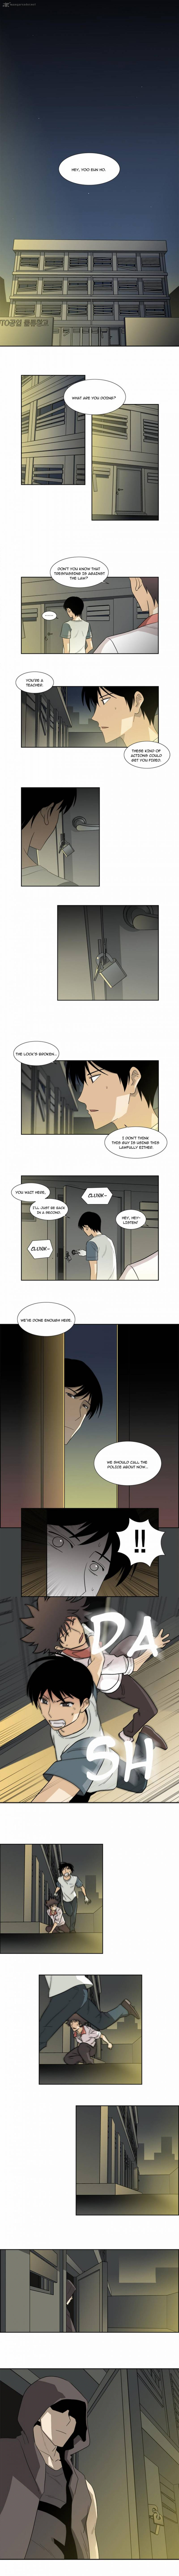 Melo Holic Chapter 29 Page 1